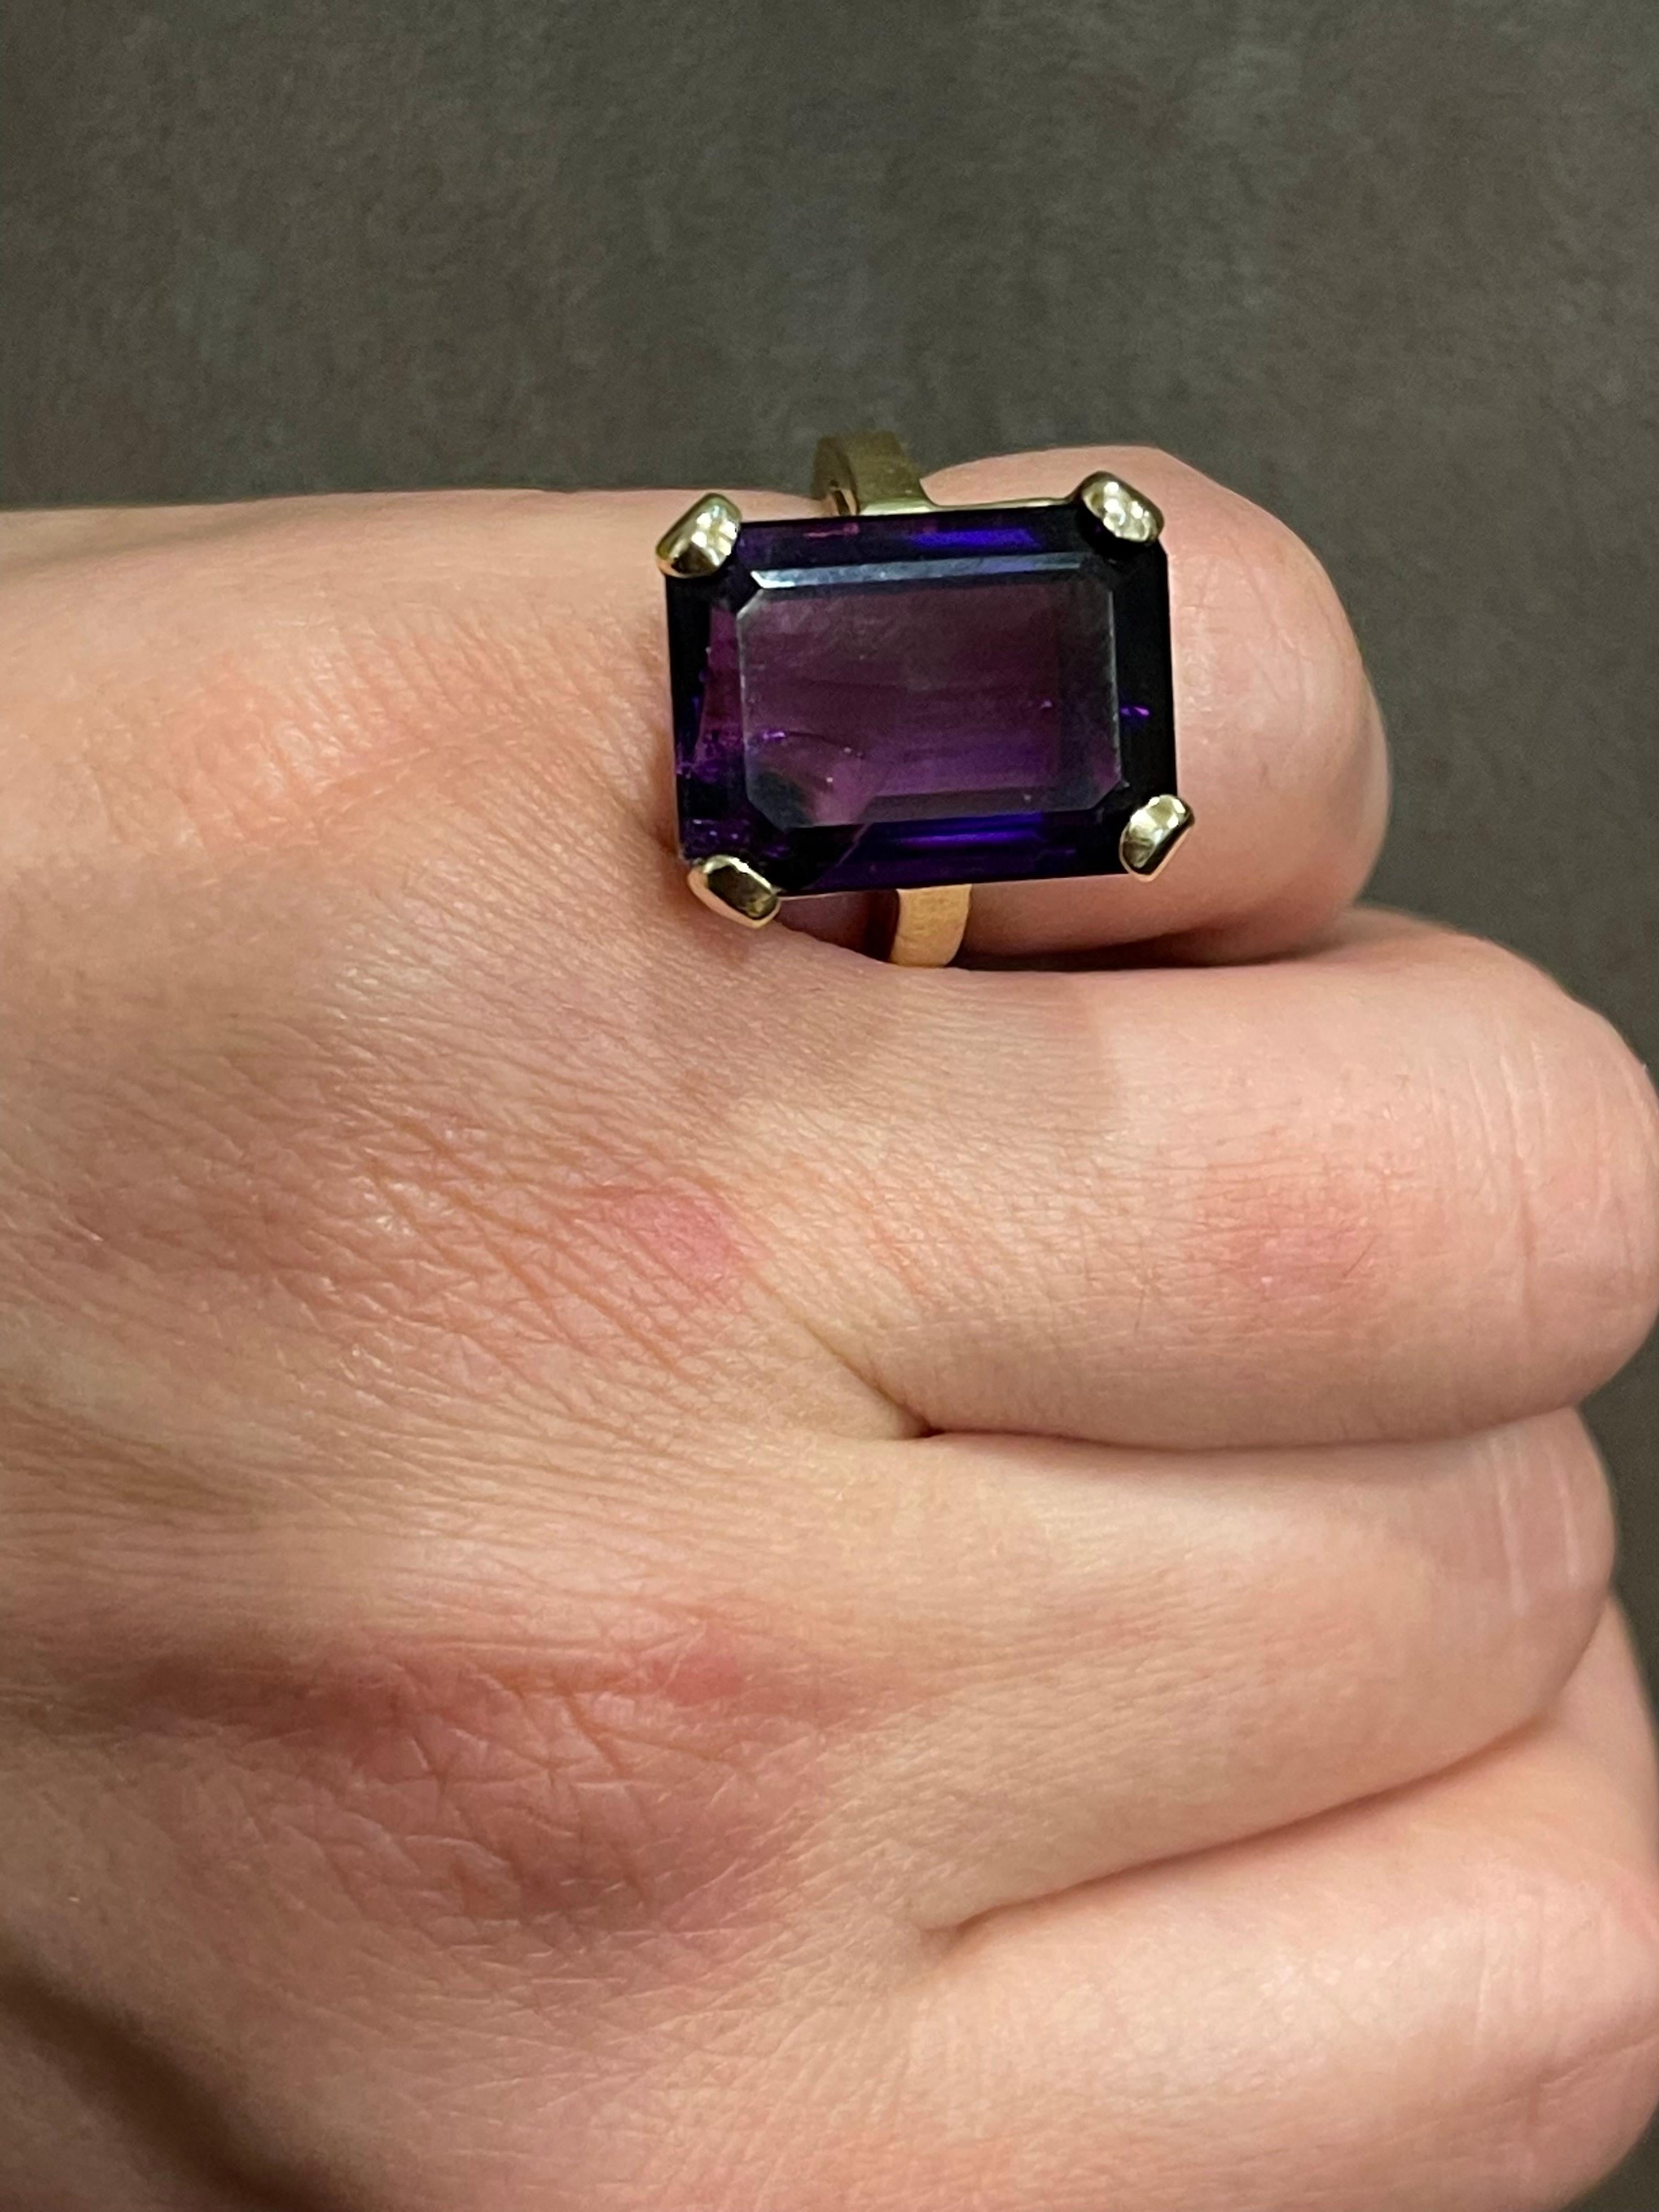 15 Carat Emerald Cut Amethyst Cocktail Ring in 14 Karat Yellow Gold For Sale 6